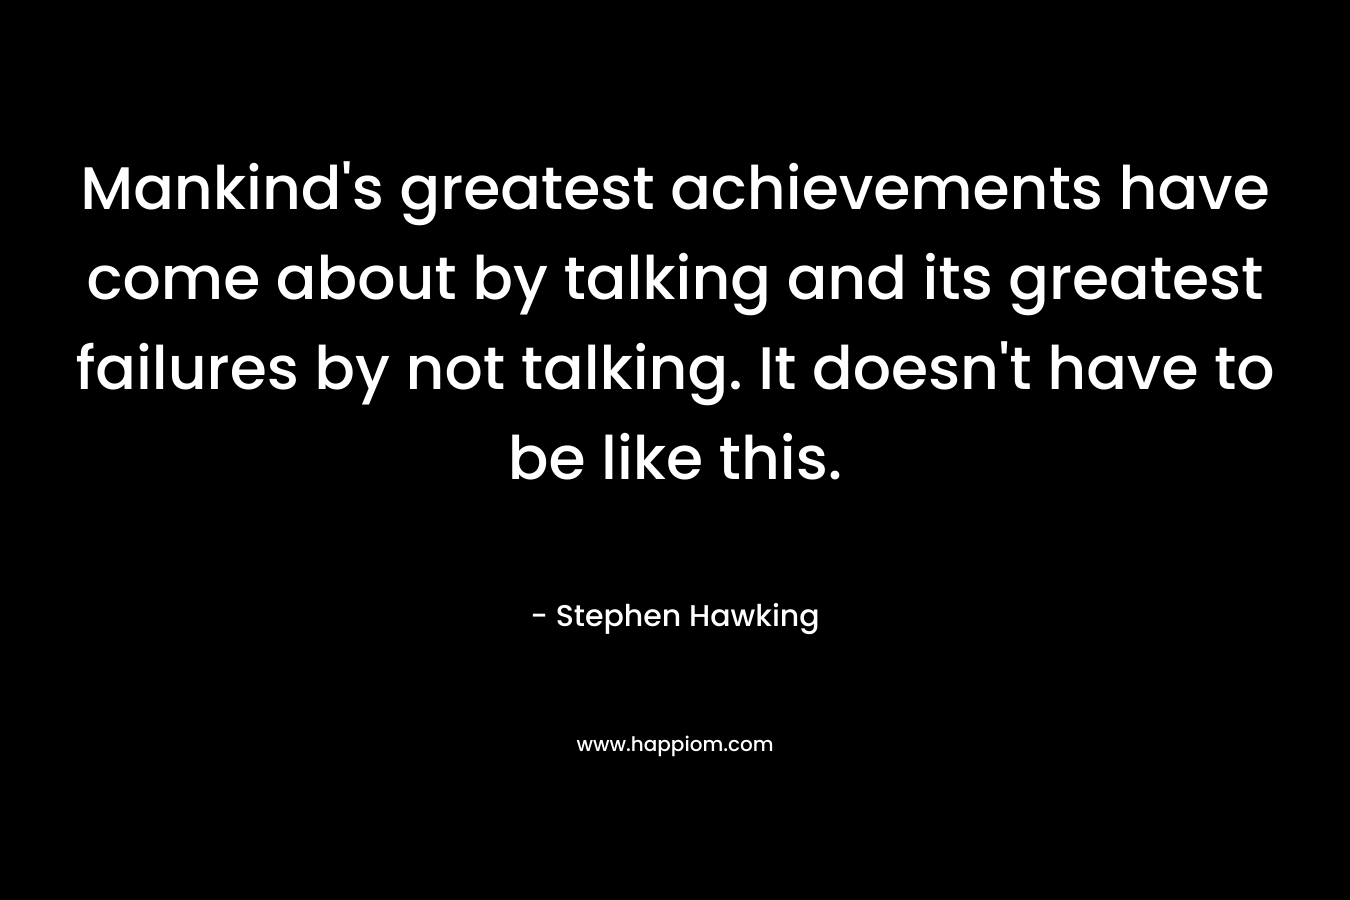 Mankind's greatest achievements have come about by talking and its greatest failures by not talking. It doesn't have to be like this.